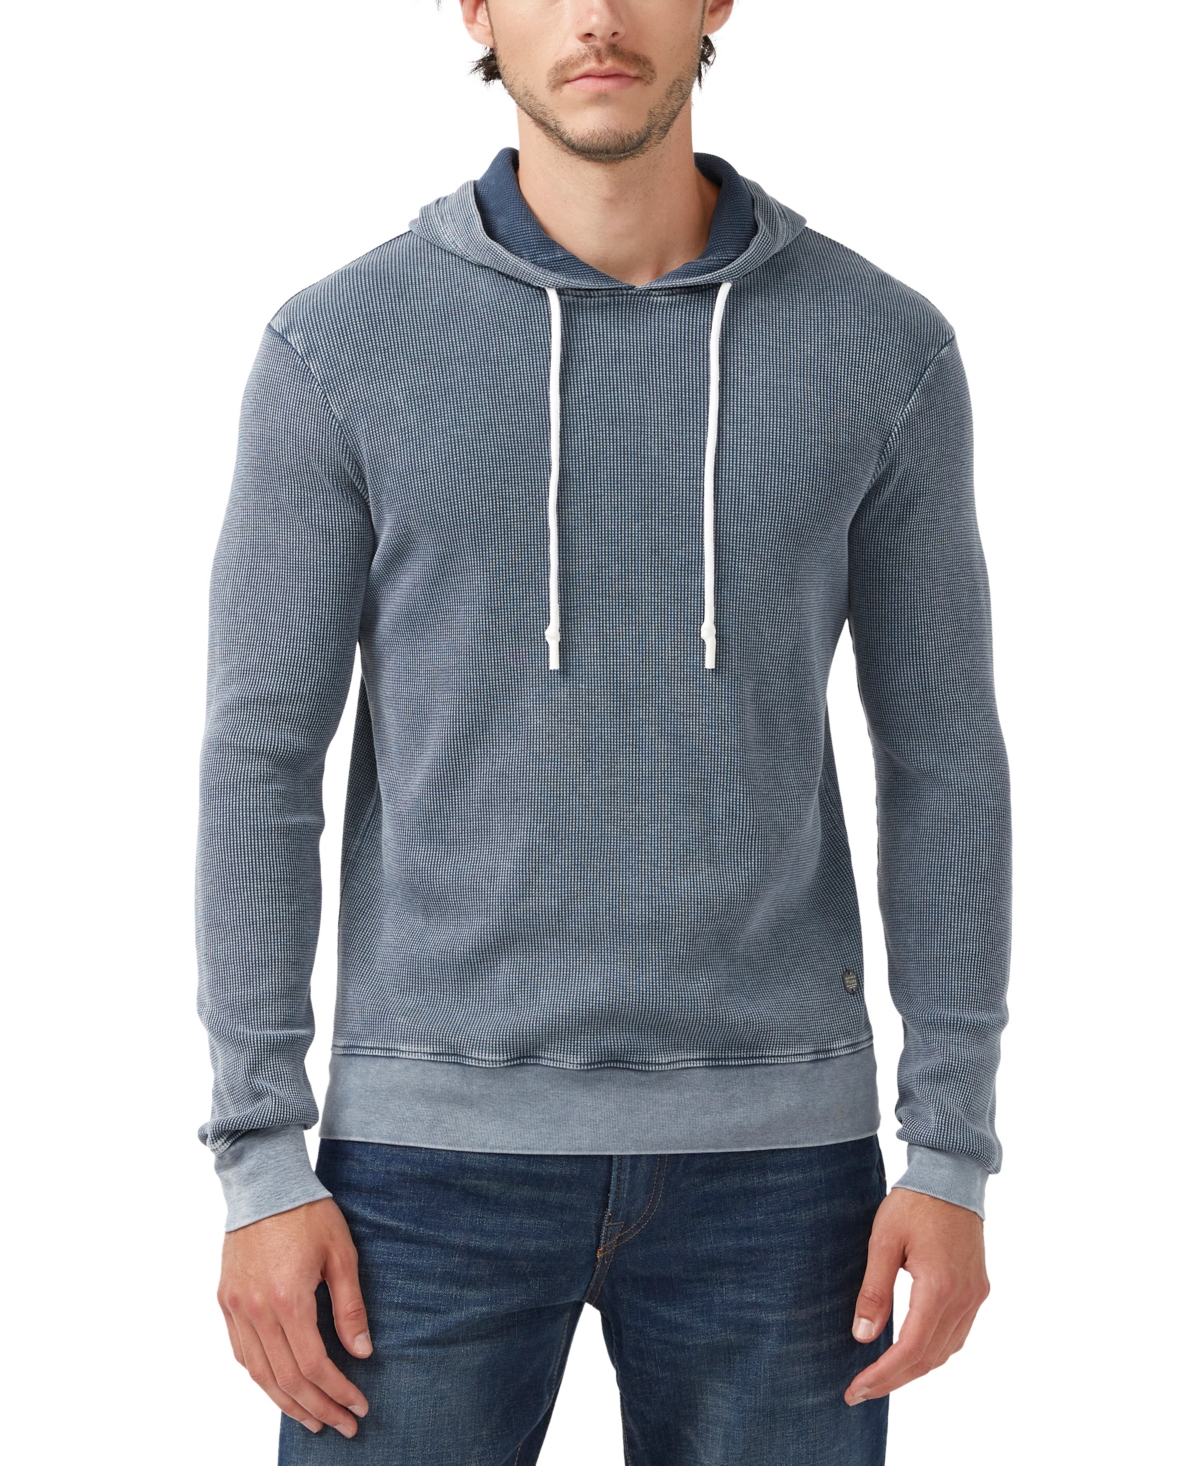 Men's Relaxed-Fit Kisamo Mood Textured Hoodie - Mirage